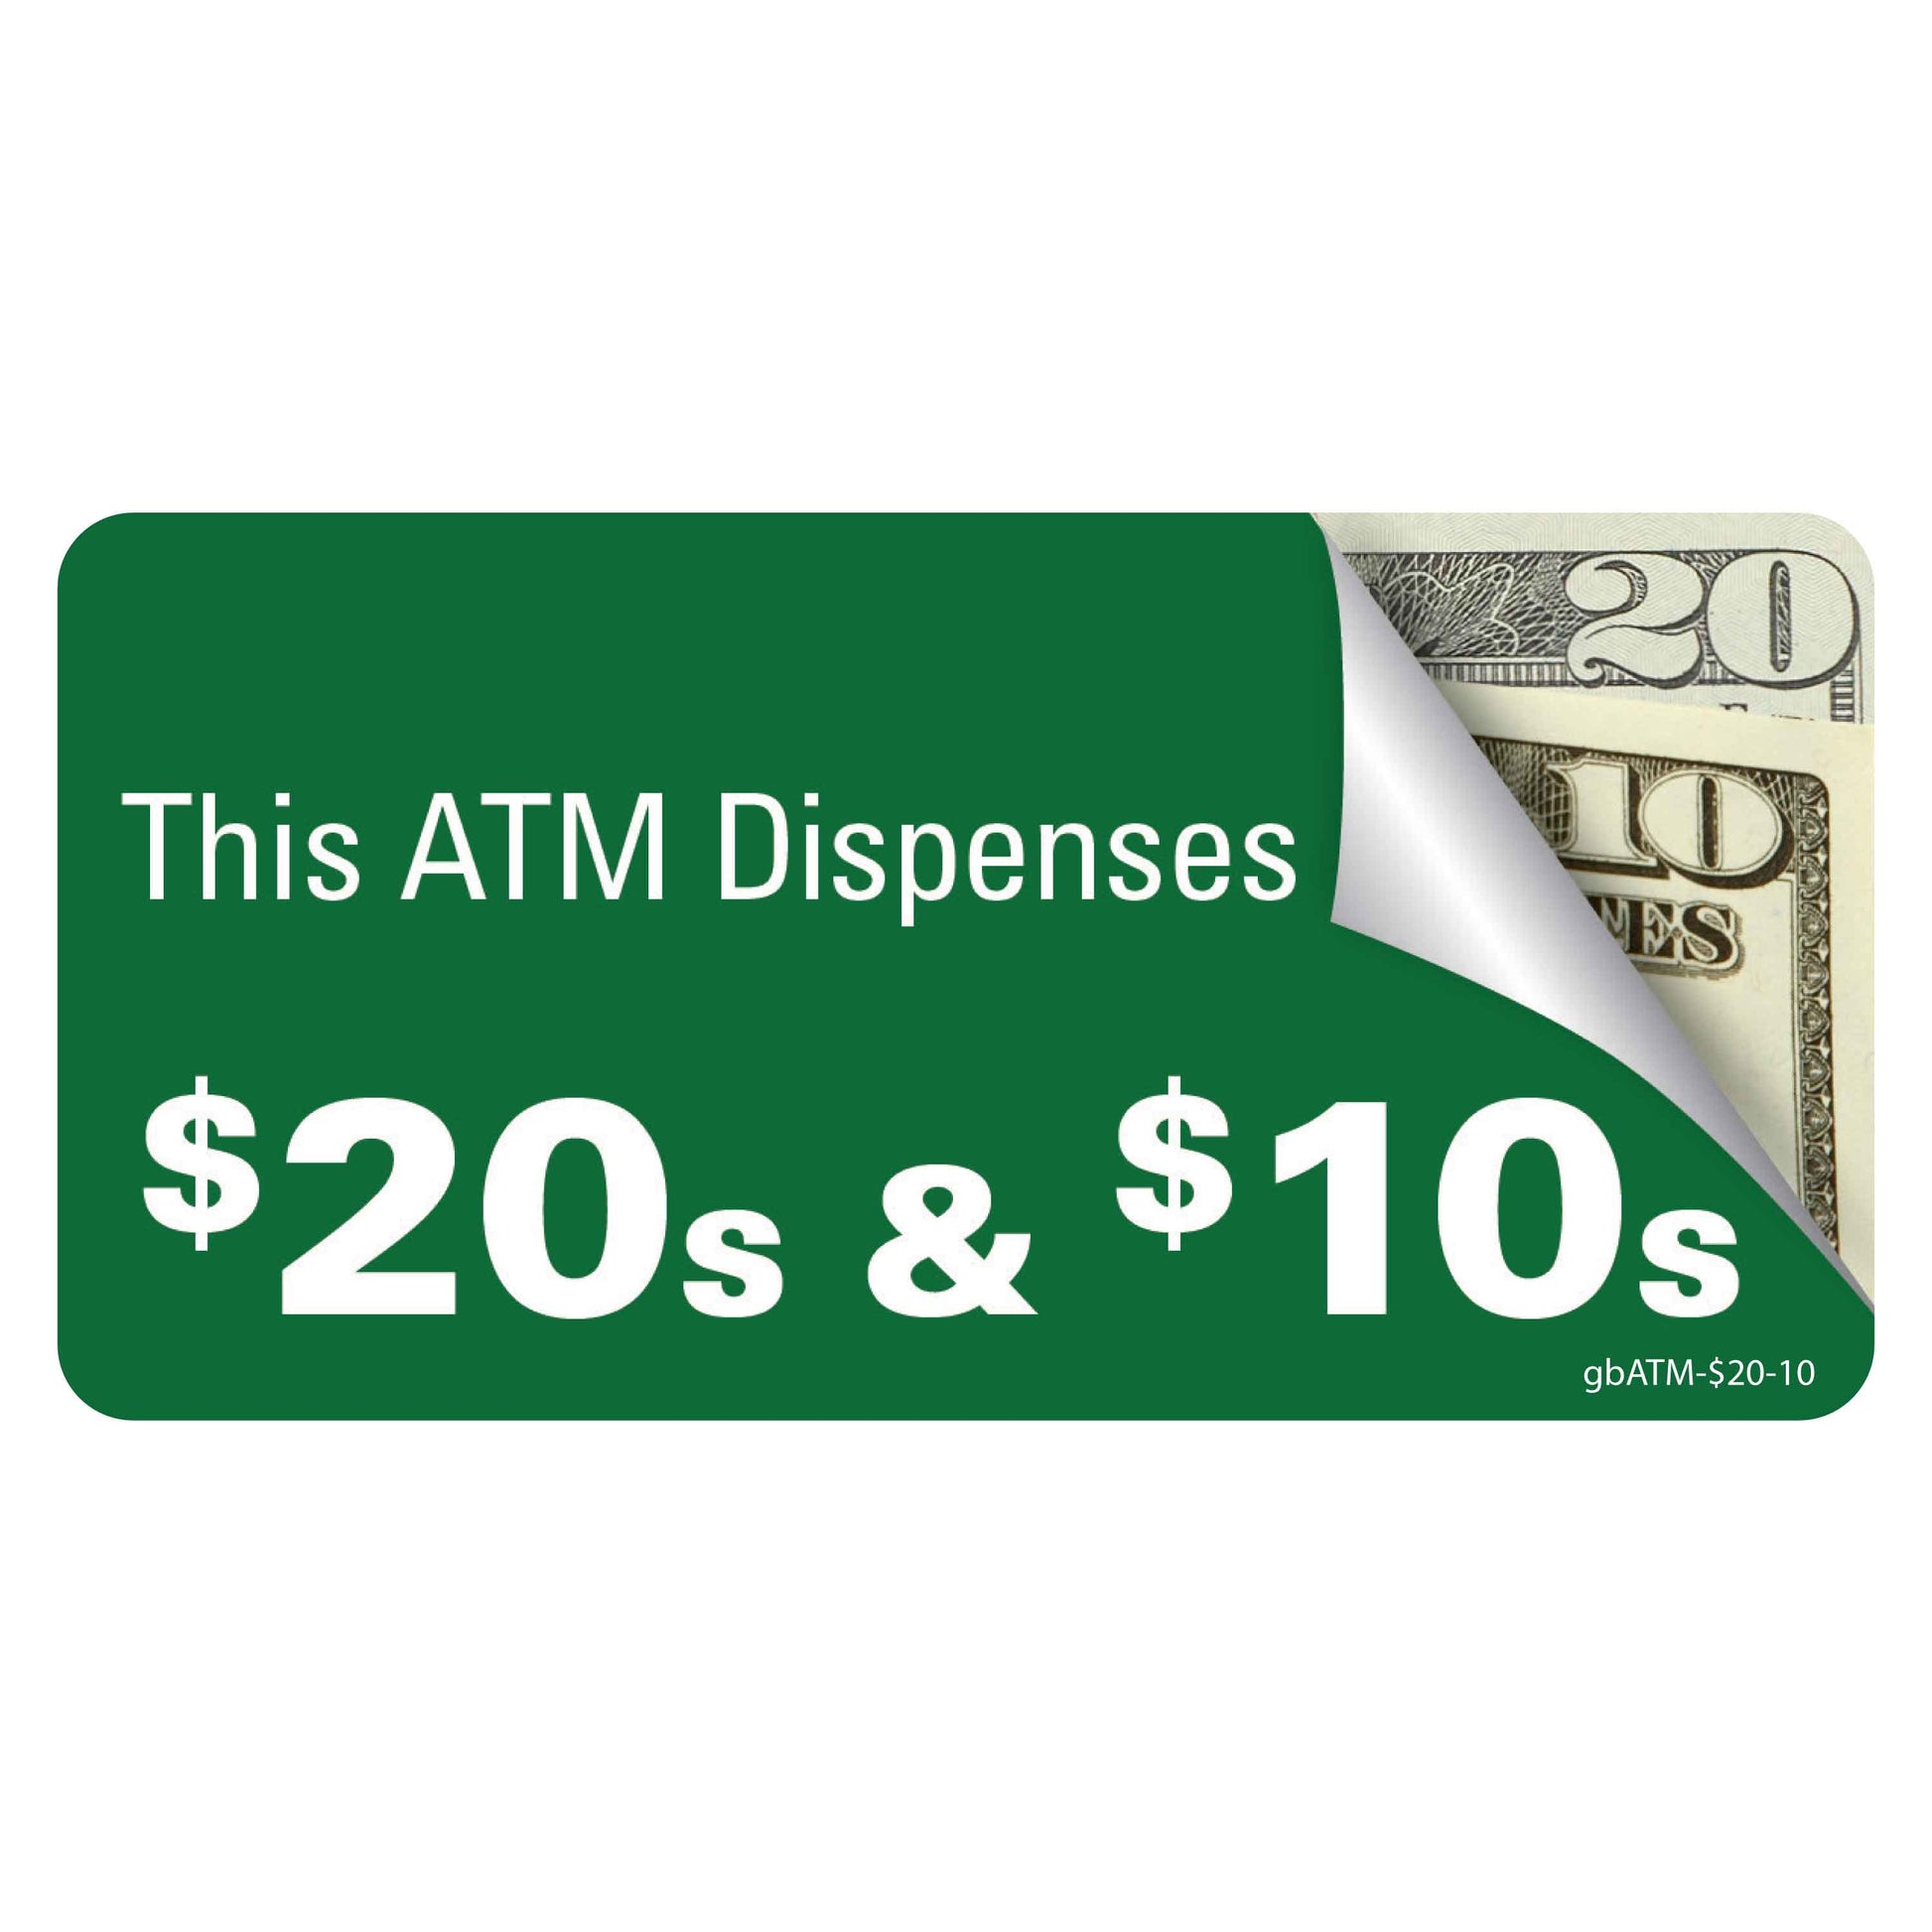 Pro ATM Dispense $20's & $10's Decal. 4 inches by 2 inches in size. 